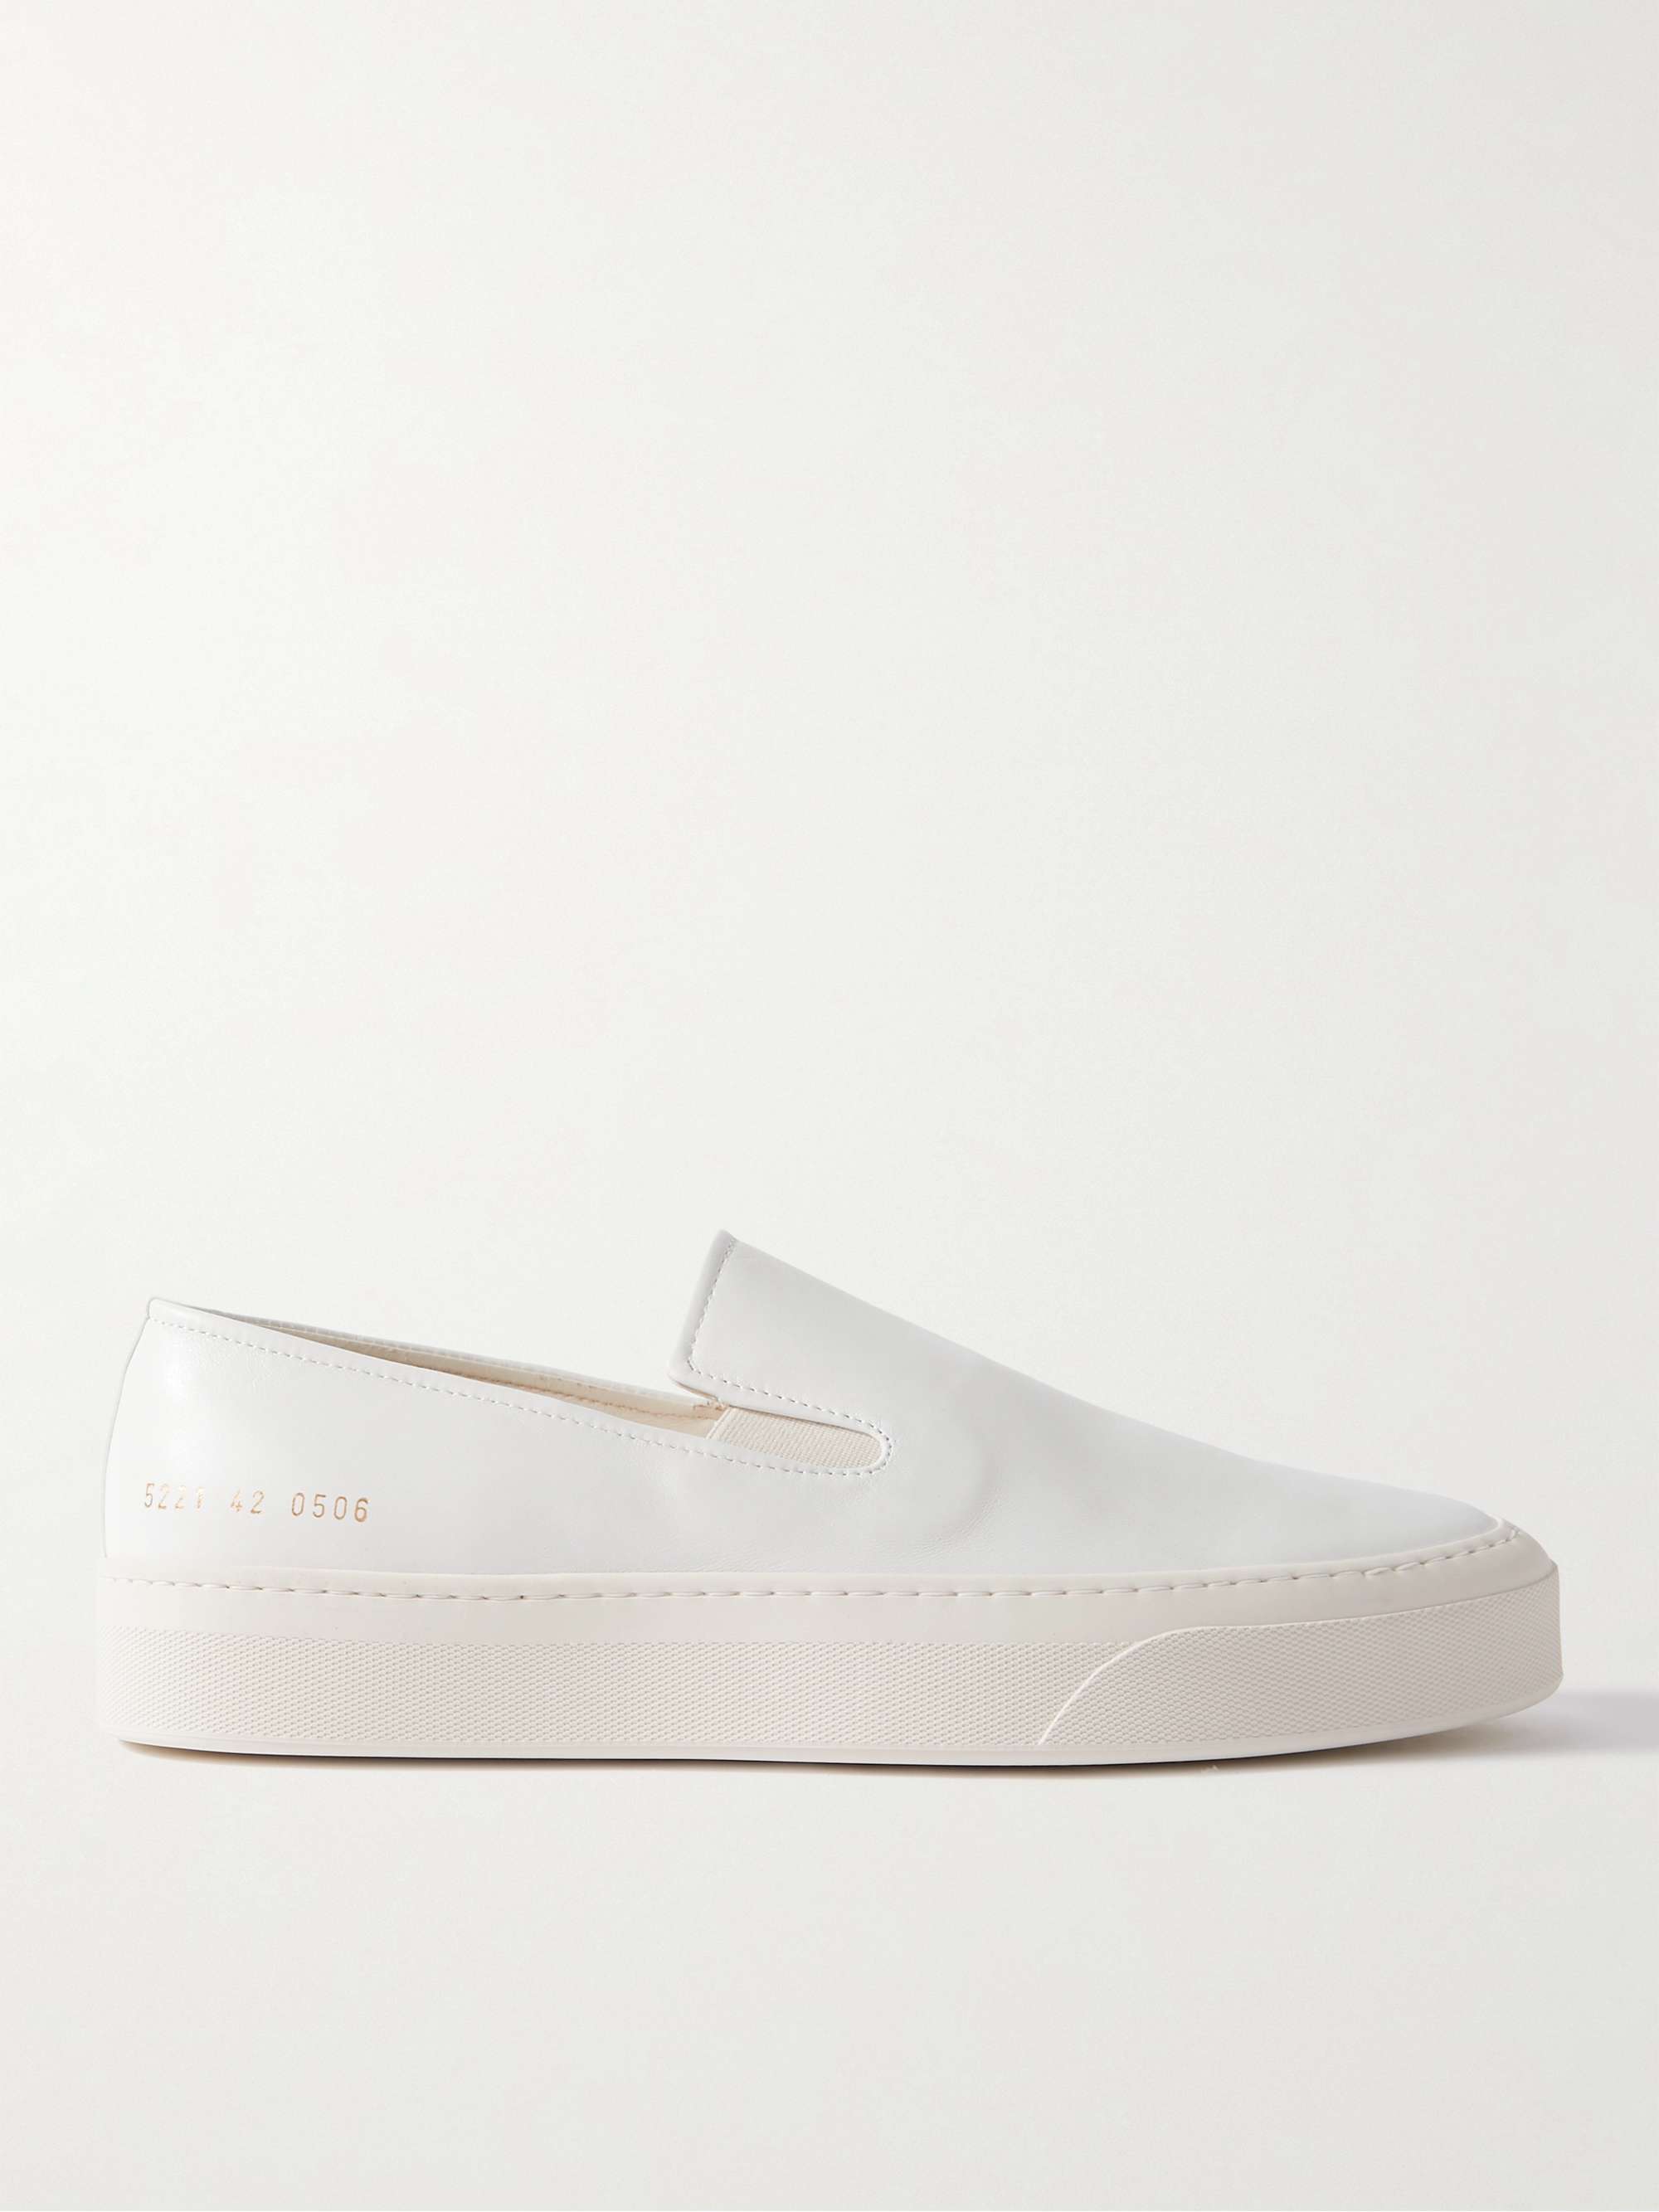 COMMON PROJECTS Leather Slip-On Sneakers for Men | MR PORTER